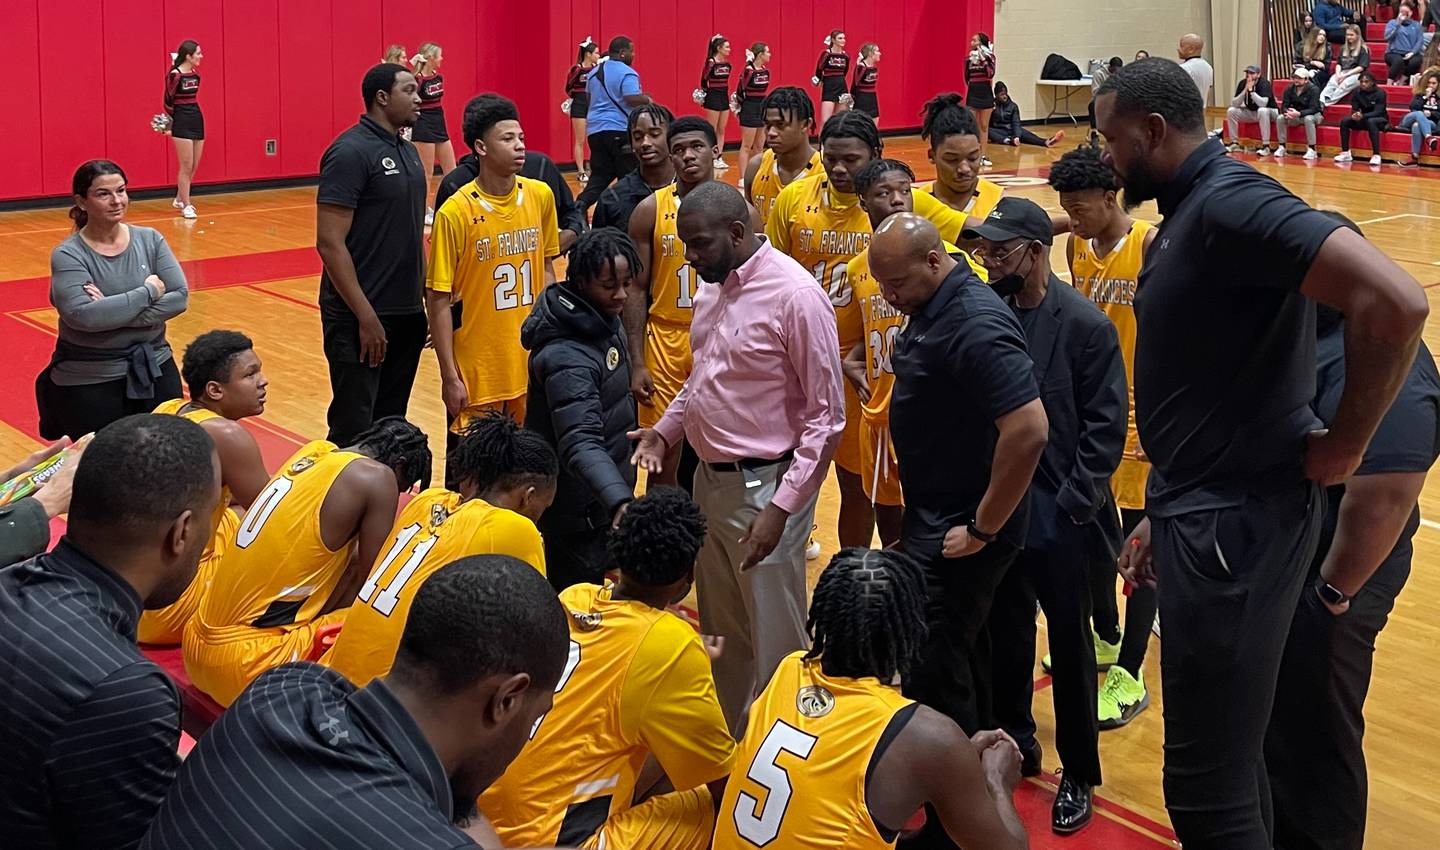 St. Frances boys basketball coach Nick Myles (center) talks to his team during Monday's Baltimore Catholic League contest against Archbishop Spalding. The No. 2 Panthers remained undefeated in BCL play with a 87-55 decision in Anne Arundel County.